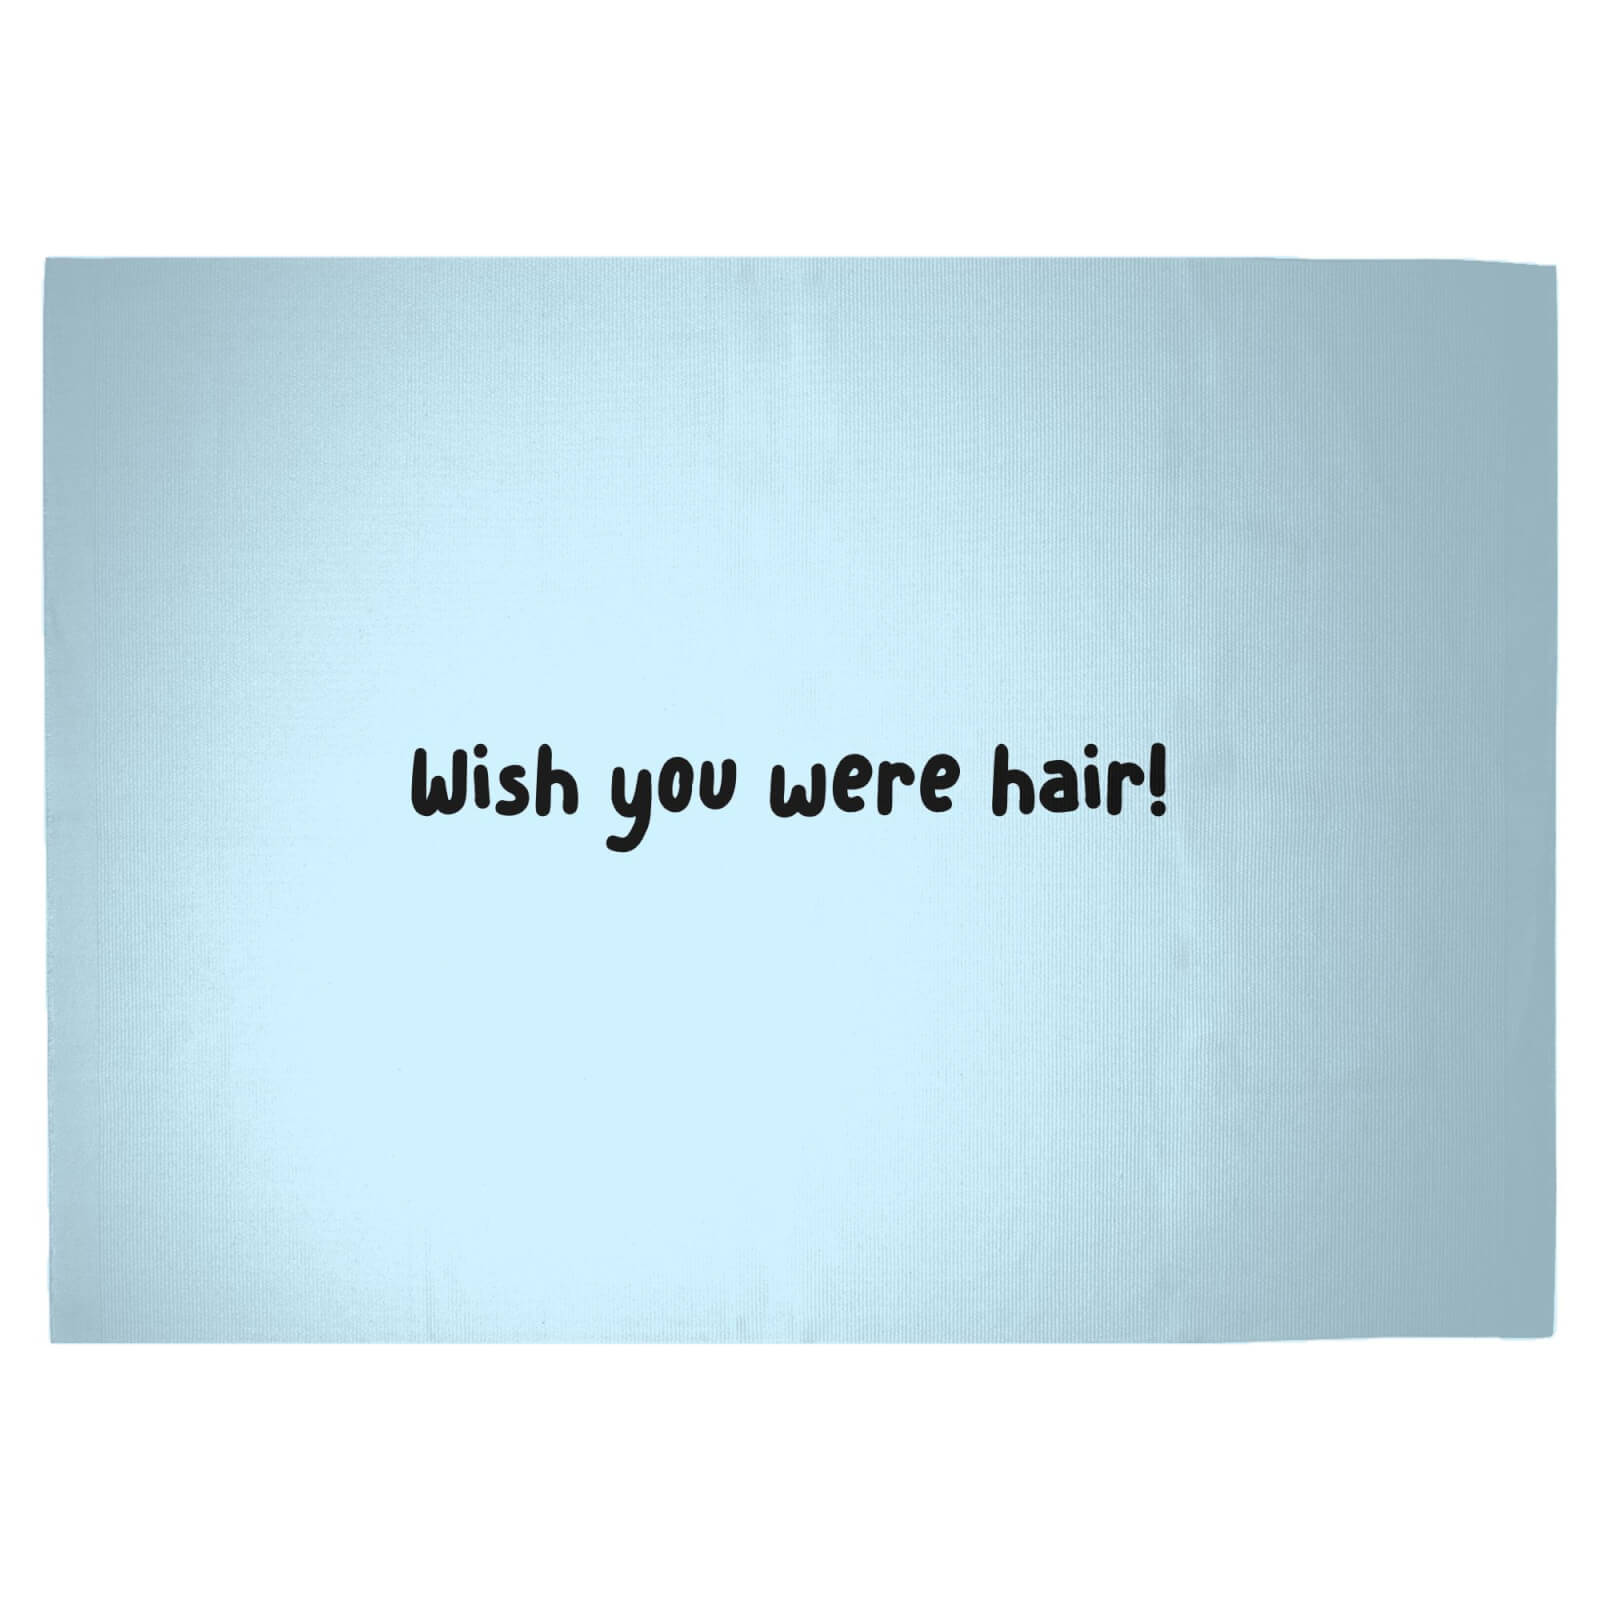 Wish You Were Hair! Woven Rug - Large